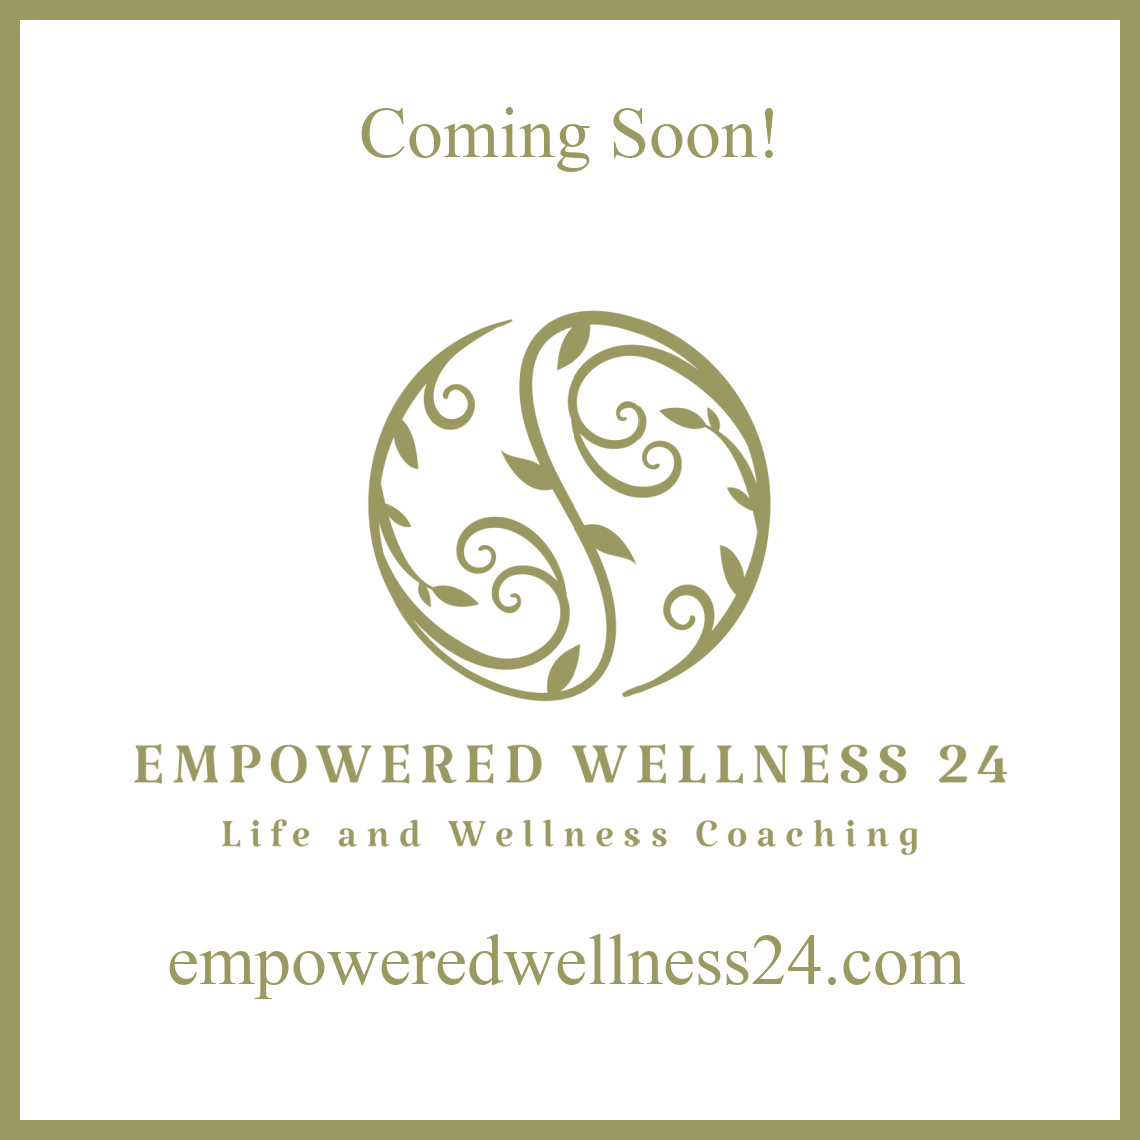 COMING SOON! empoweredwellness24.com Transform your life with personalized guidance and support from a lifestyle coach. Elevate your potential today! #lifestyle #coaching #WellnessJourney #healthylifestyle #SafePlace @paperbeadboutiq